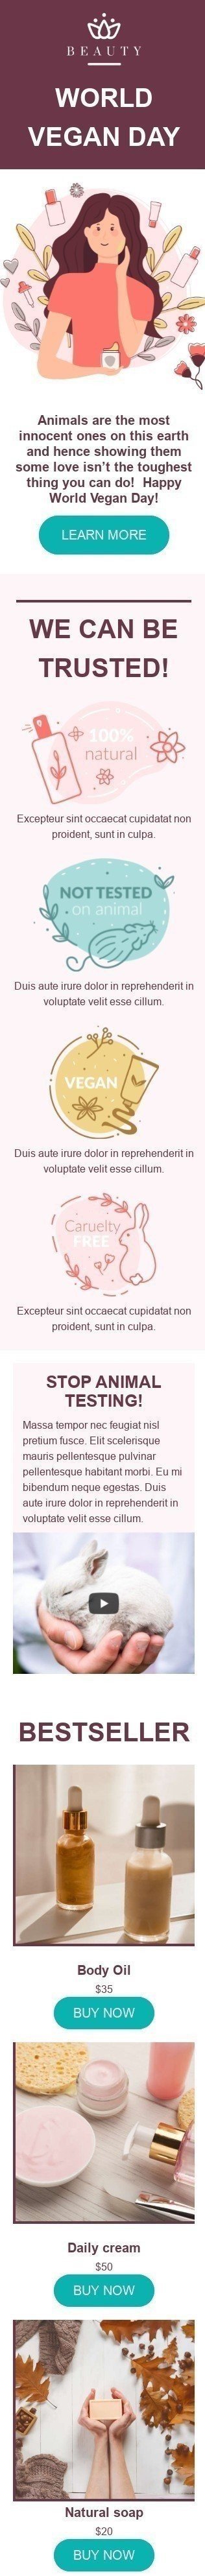 World Vegan Day Email Template «Not tested on animal» for Beauty & Personal Care industry mobile view